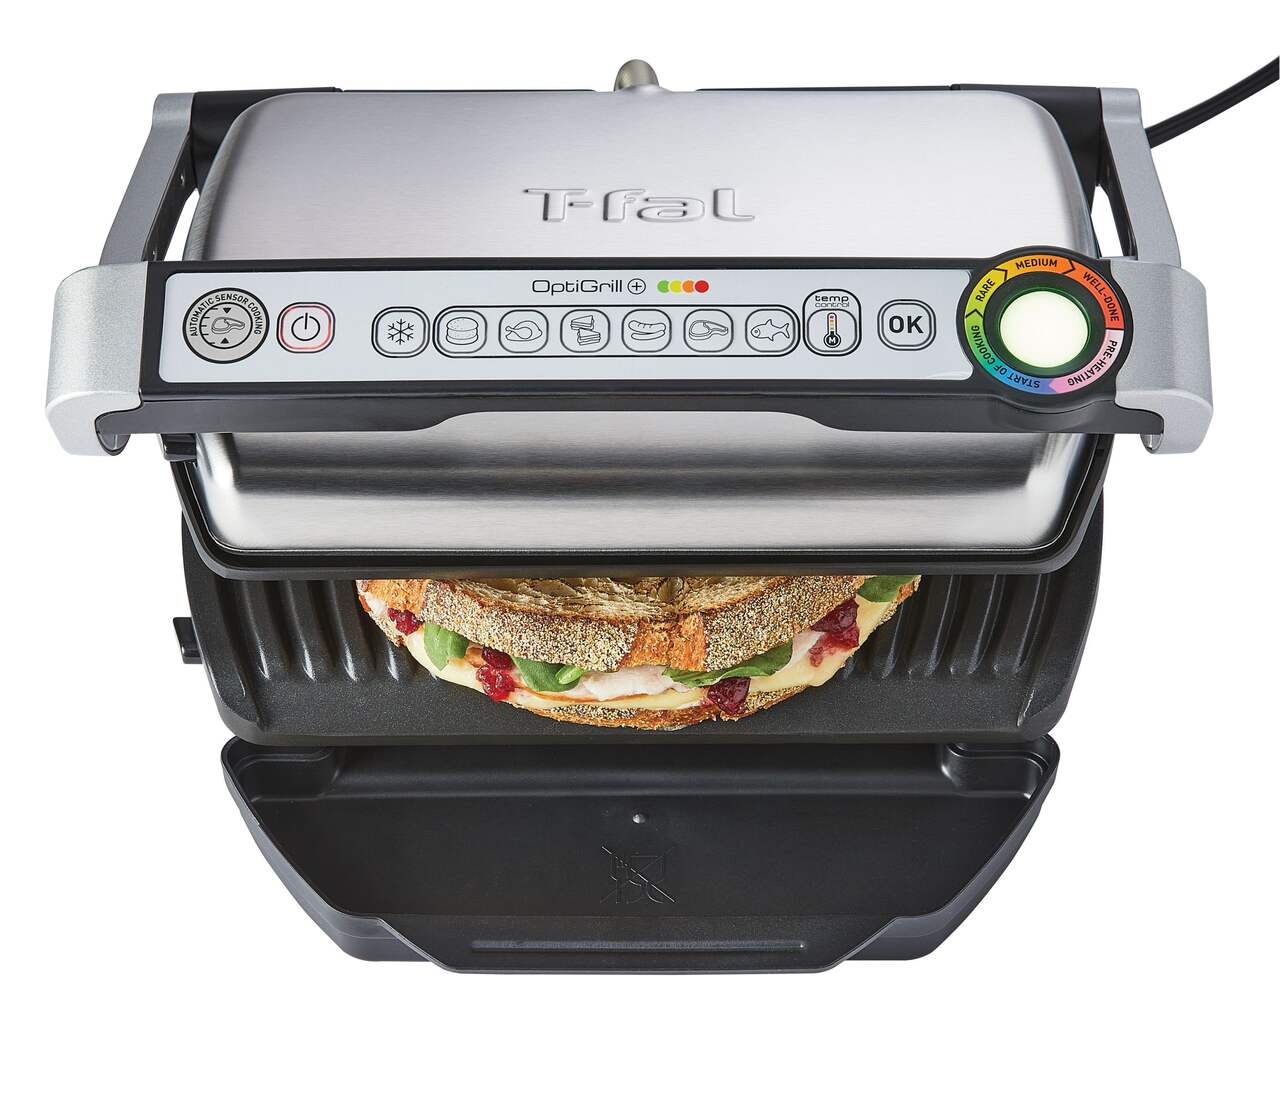 T-fal Stainless Steel OptiGrill + XL Indoor Grill, 1 ct - King Soopers